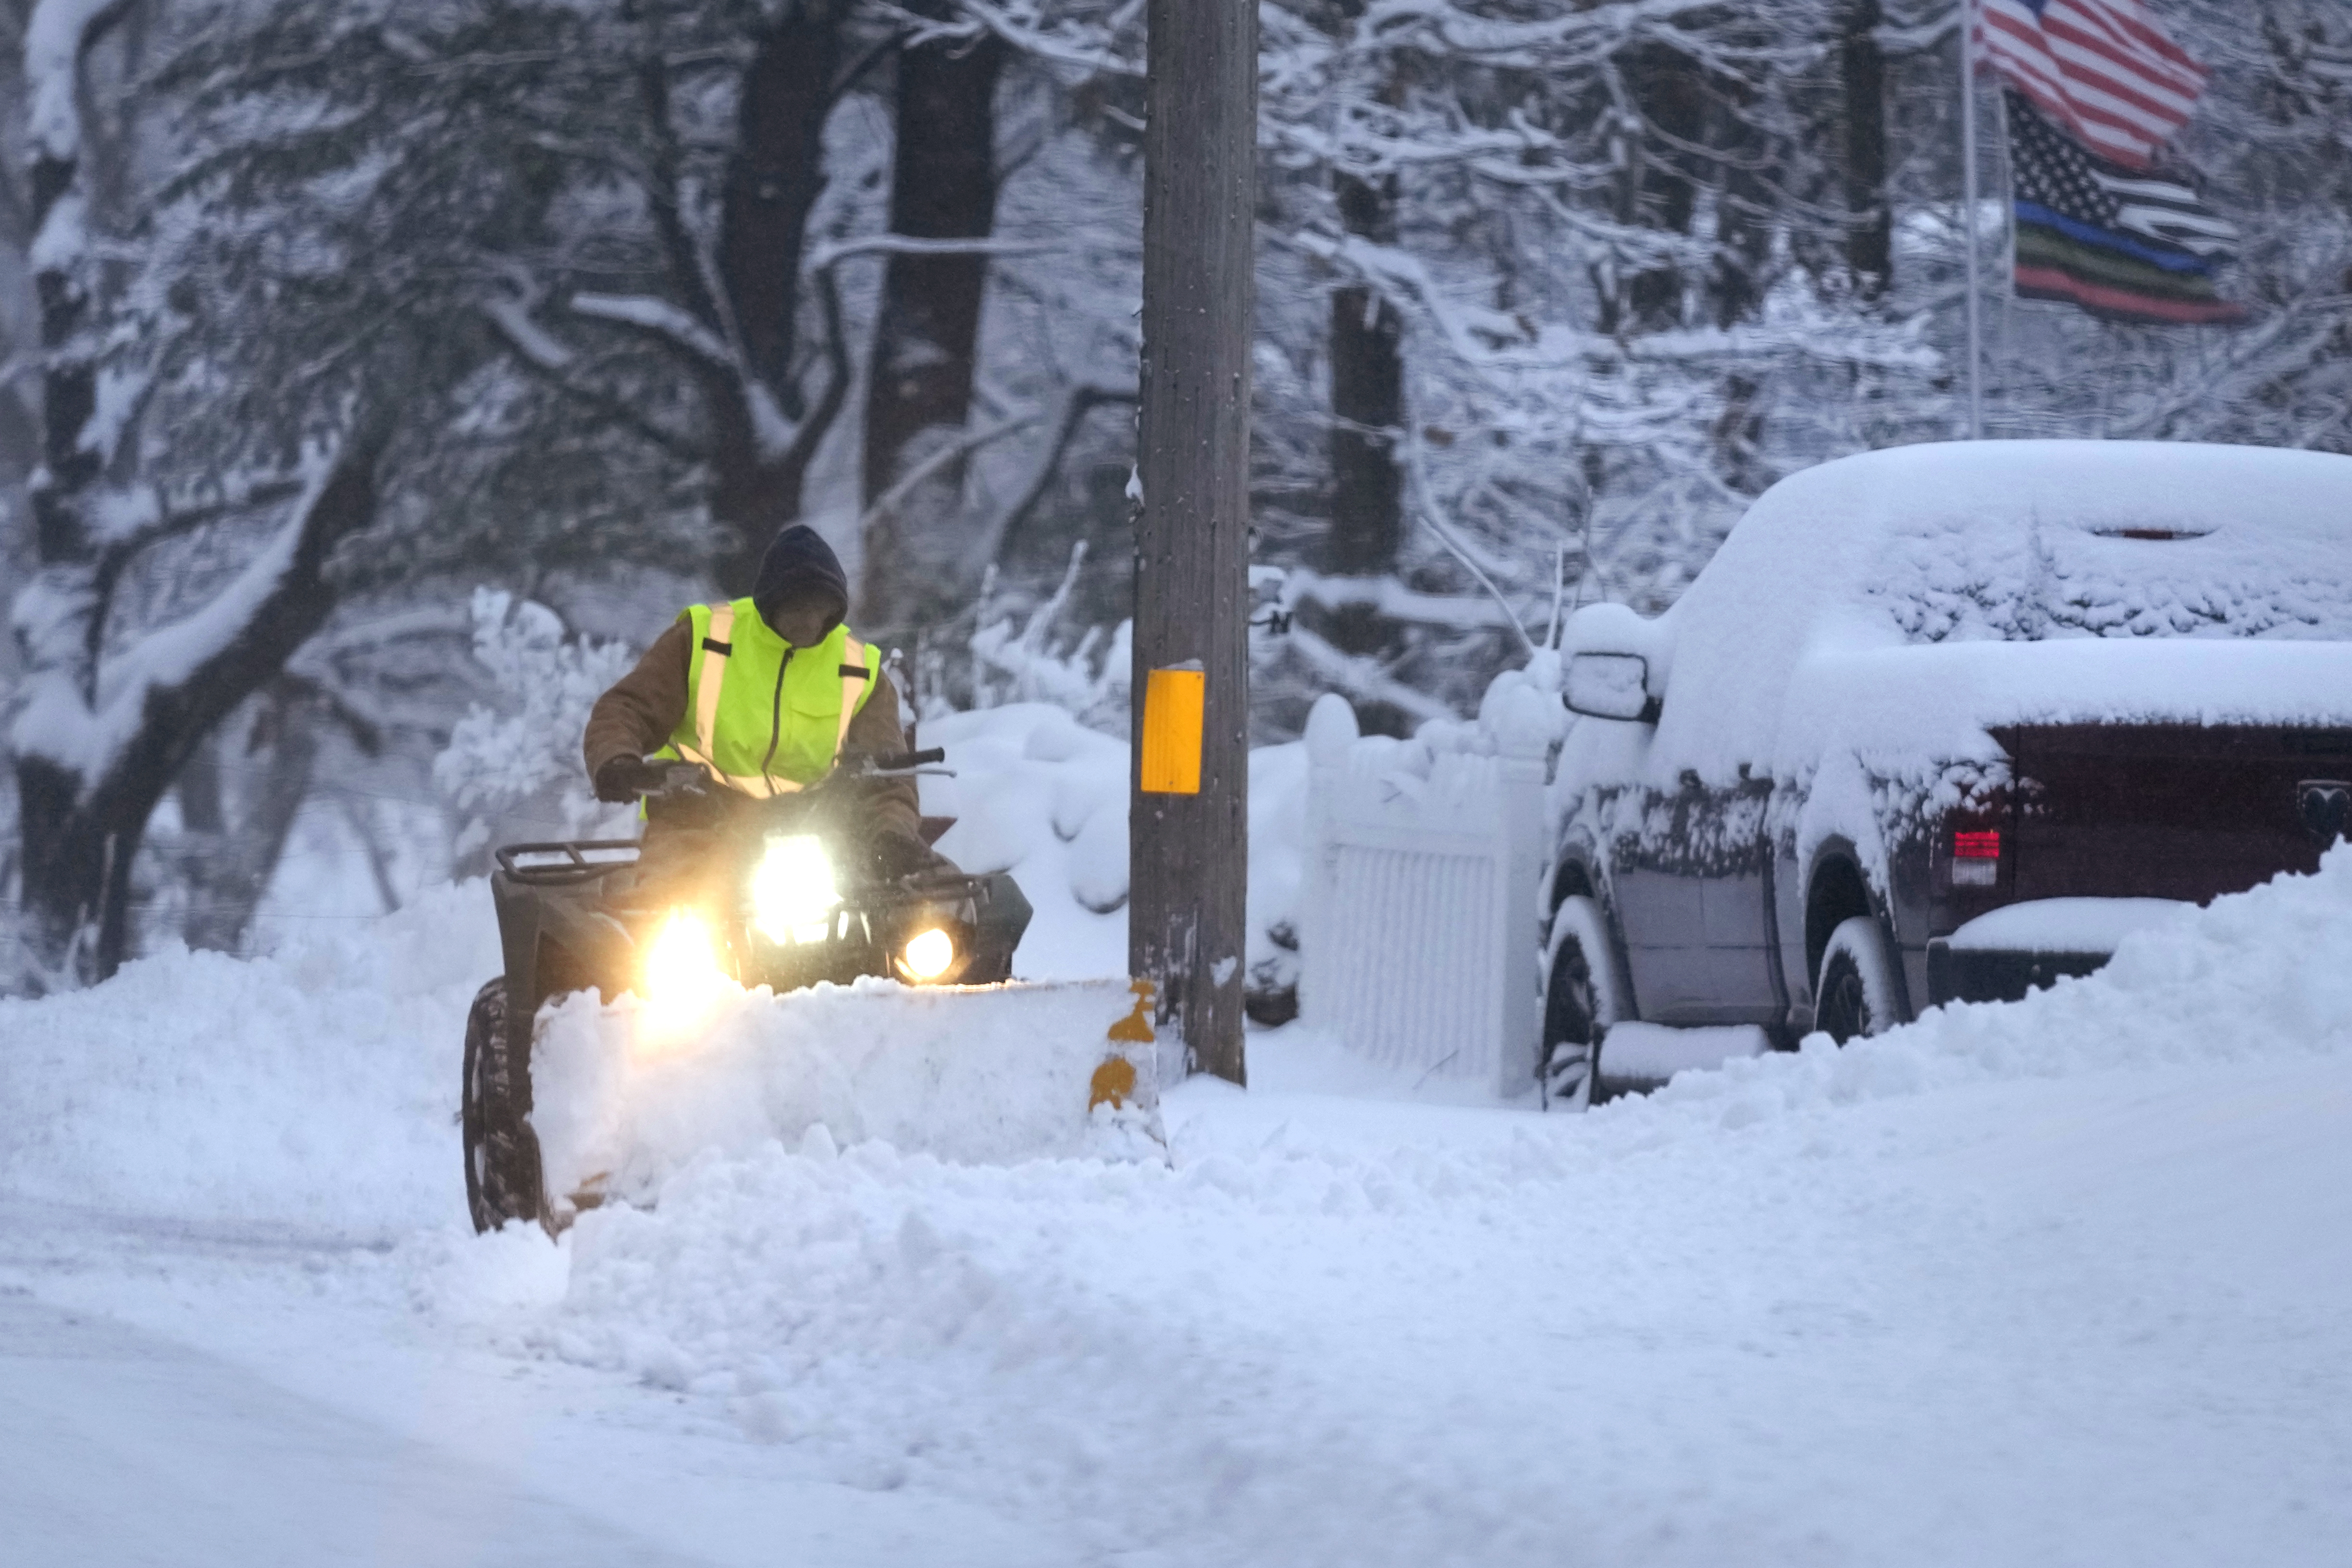 Major winter storms bring snow, ice and travel hazards to both US coasts